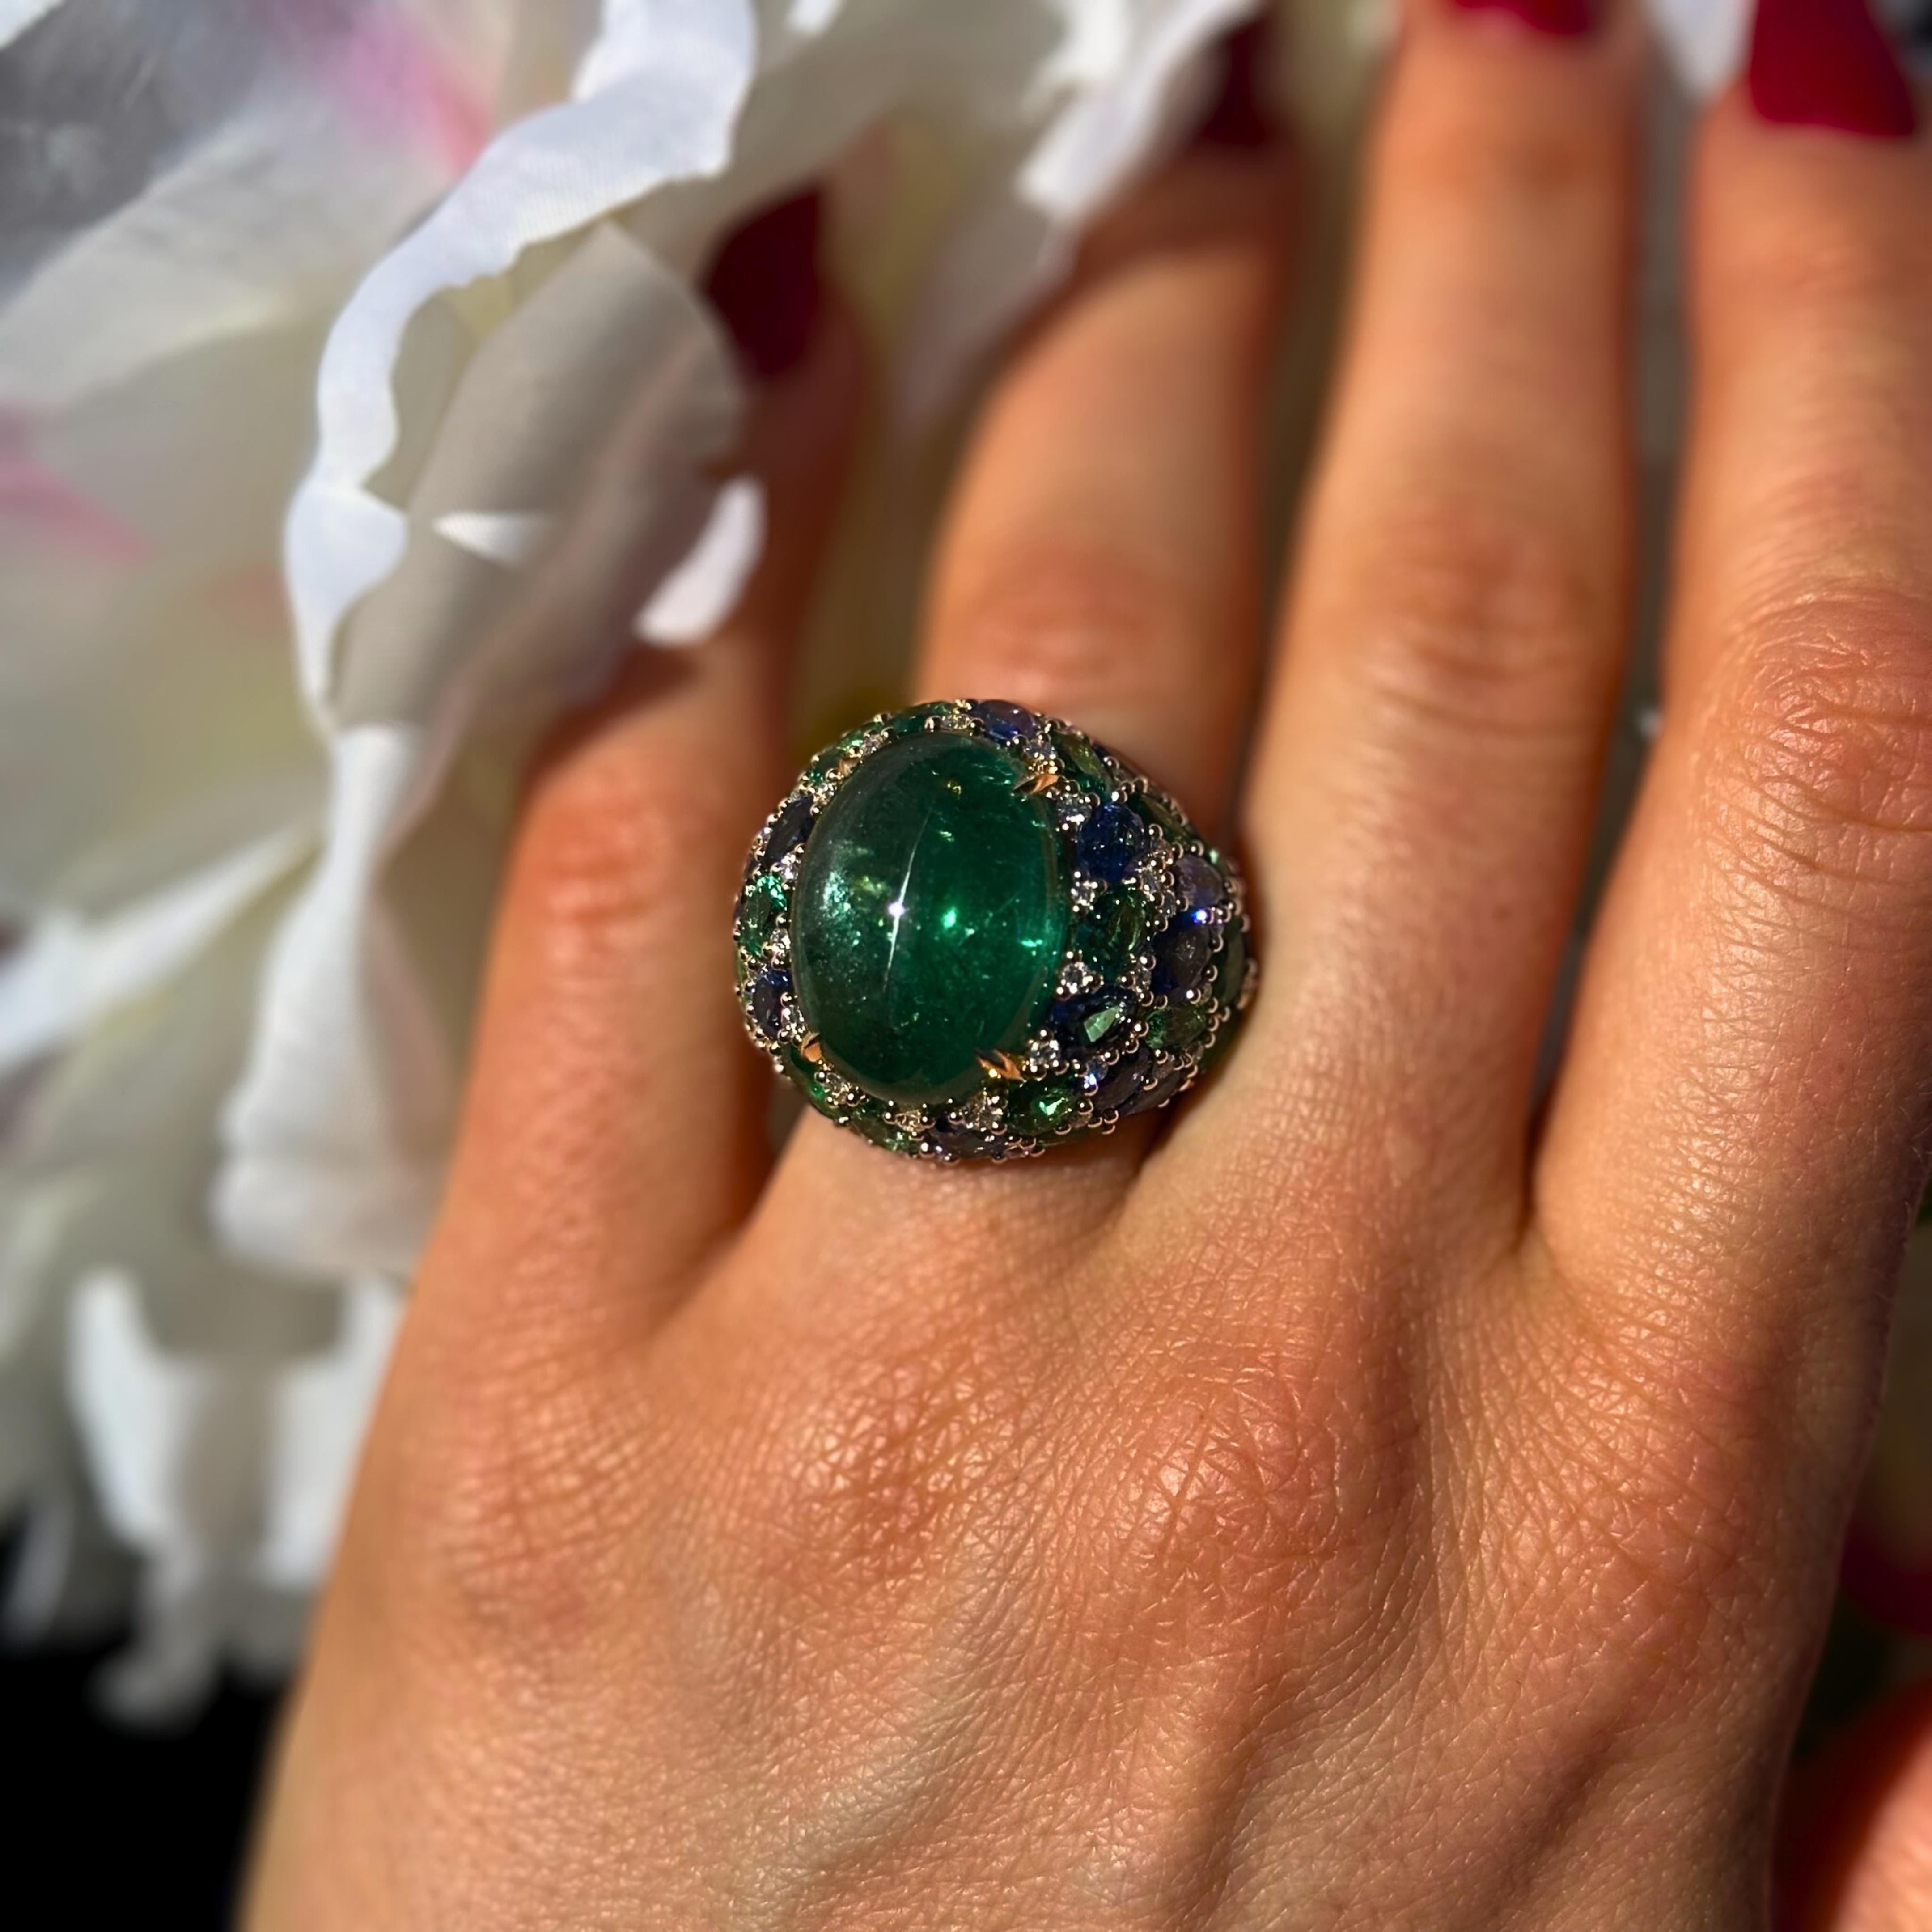 Rough Cut Remarkable Emerald Sapphire Diamond 18K Yellow Gold Ring For Her For Sale